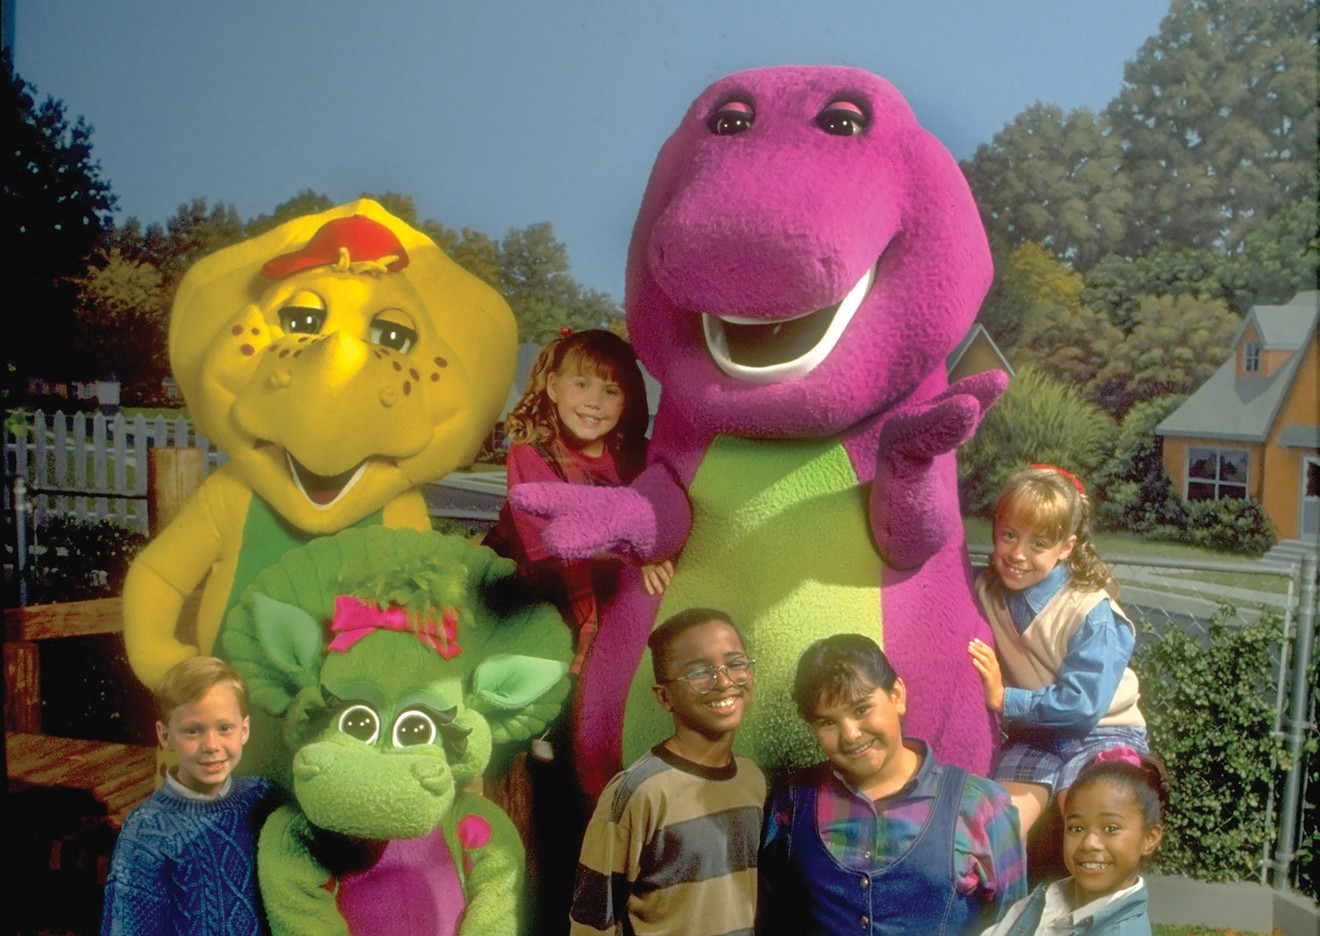 But everyone was perfectly fine with PBS telling us this is what dinosaurs looked like.